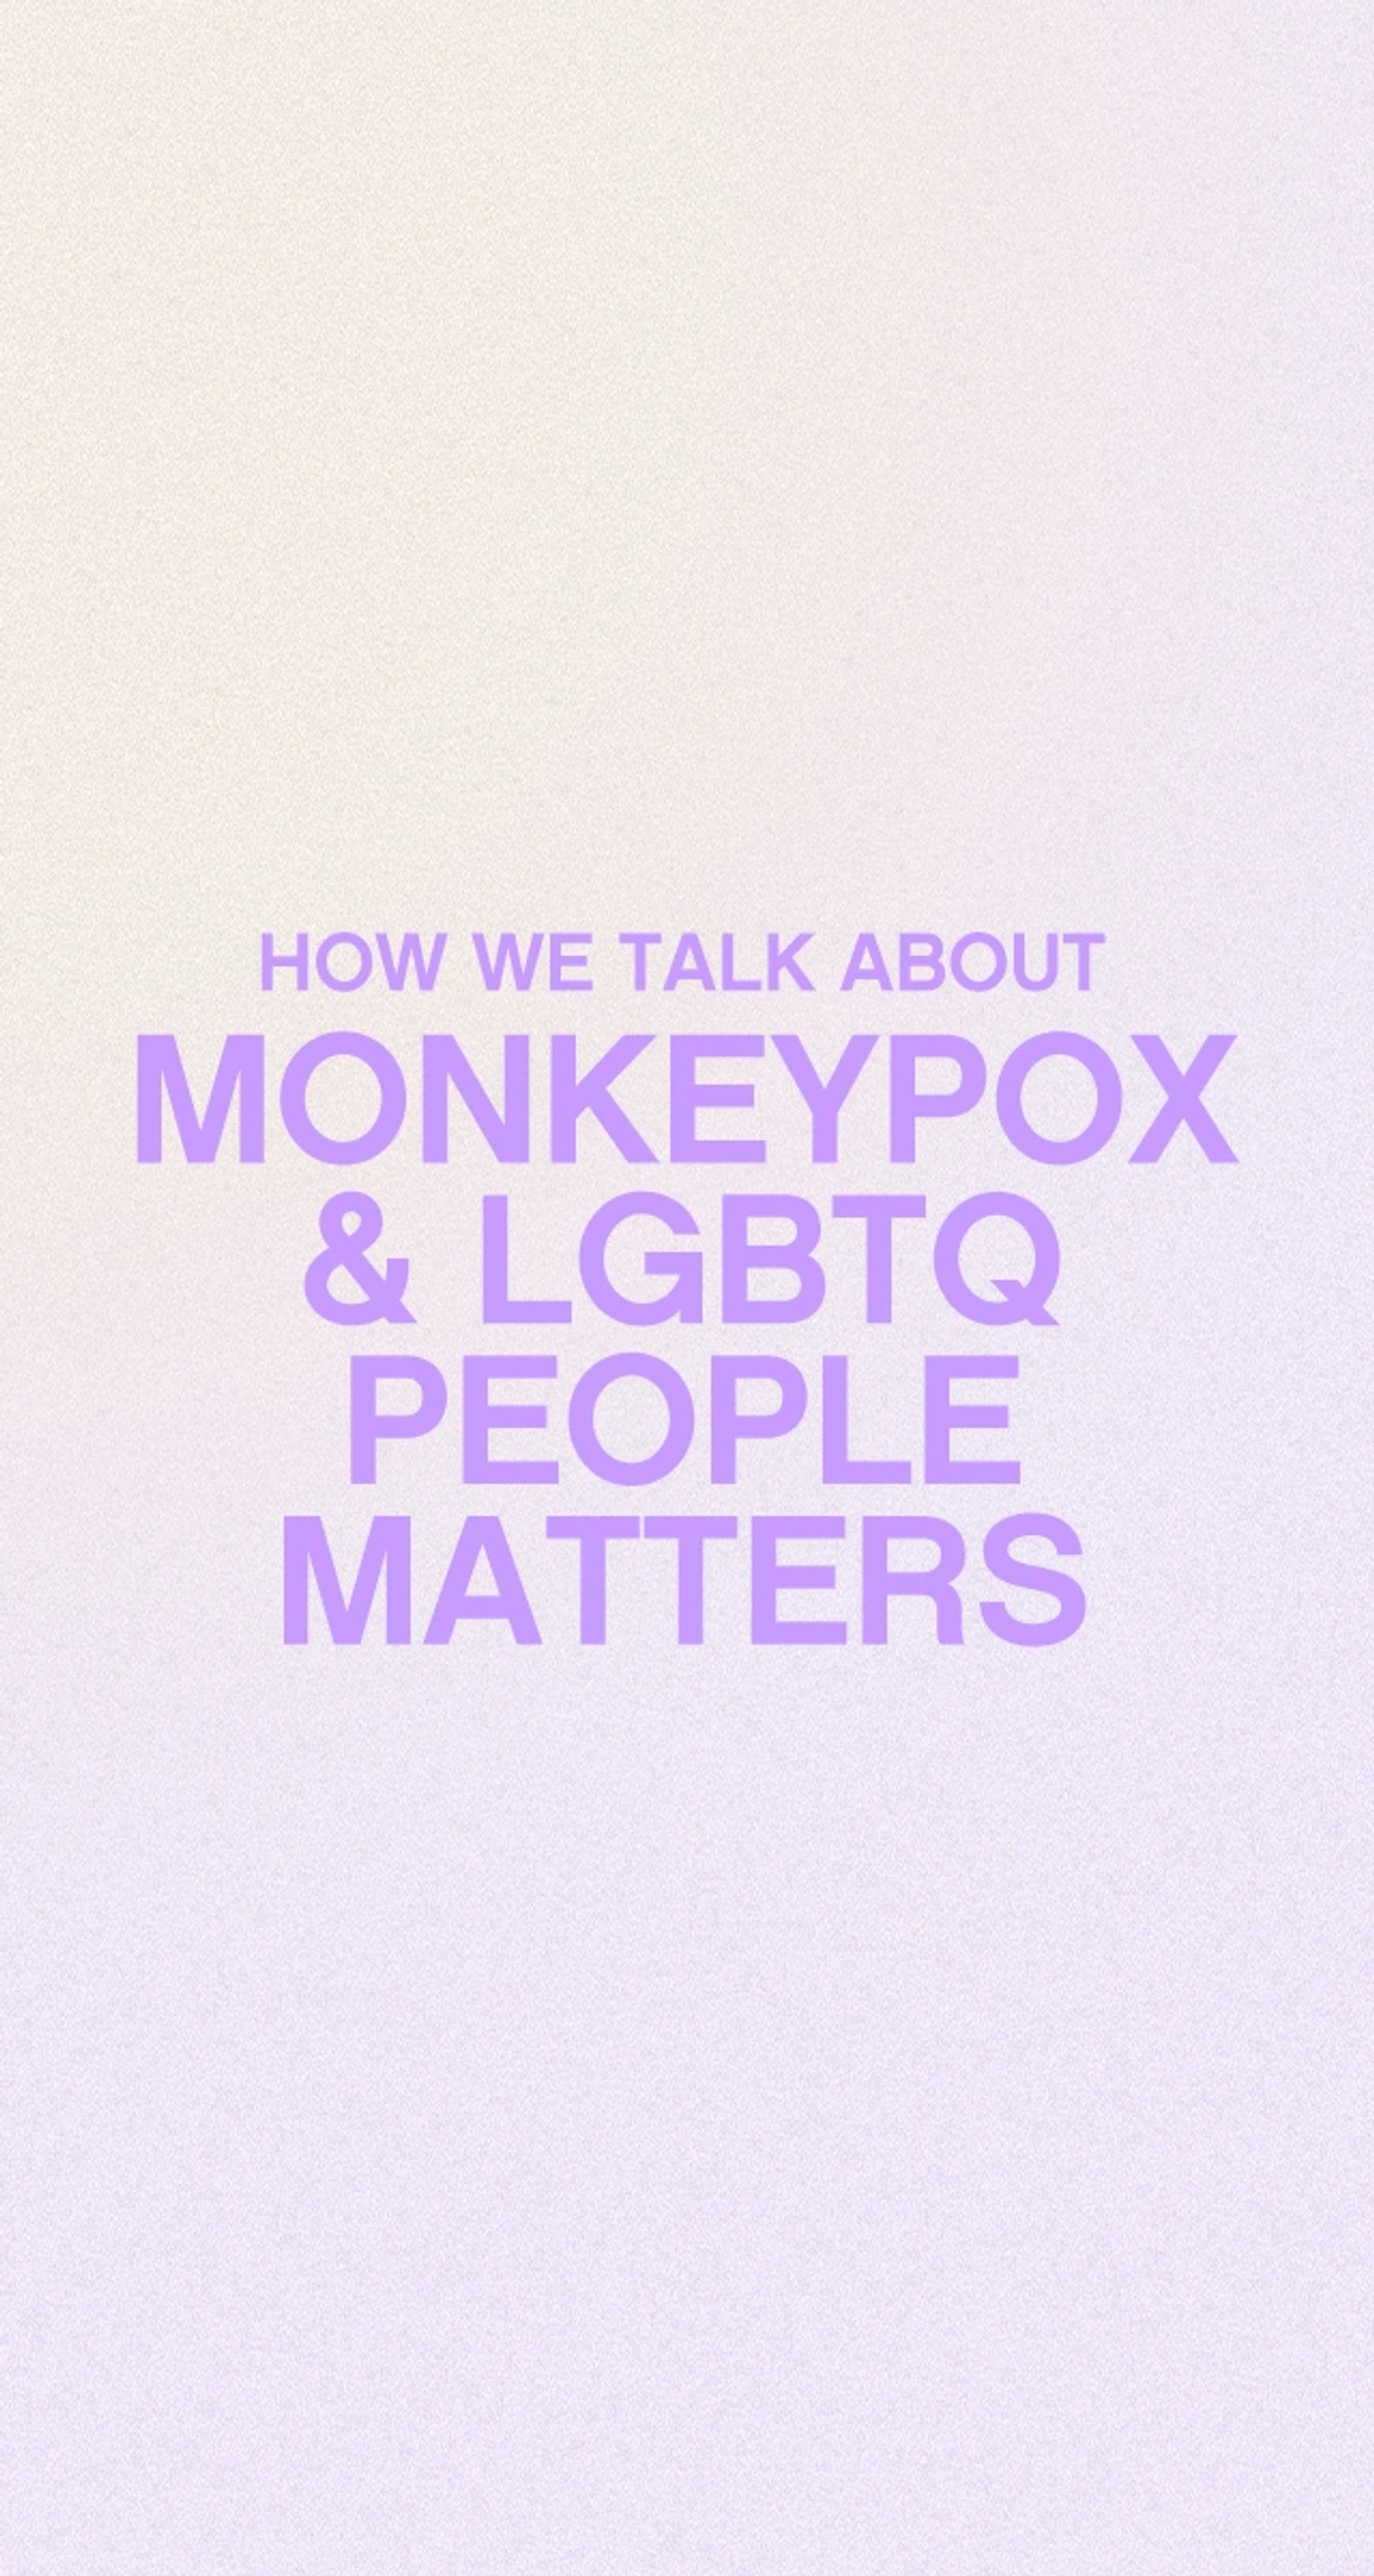 a banner with purple letters reading "how we talk about monkeypox and lgbt people matters"